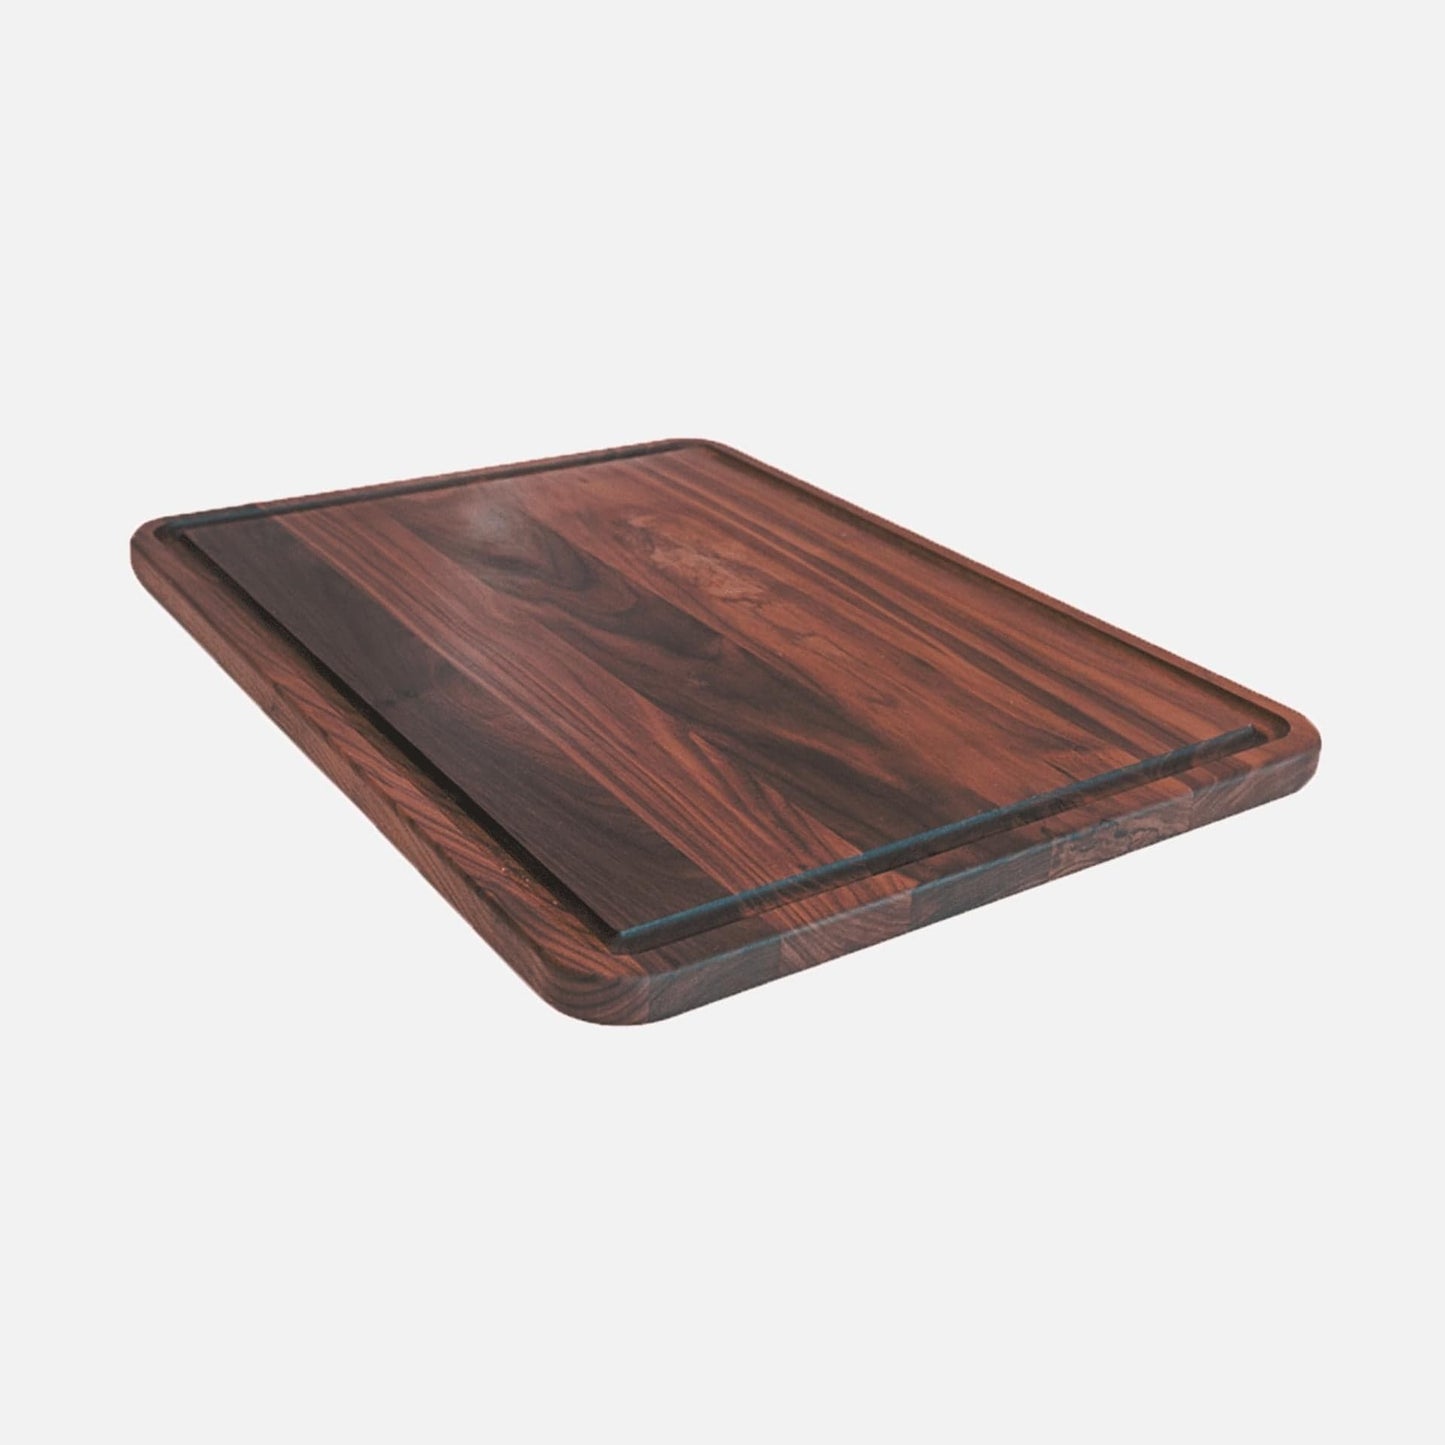 TeakCraft Large Walnut Cutting Board with Sorting Compartment and Juic